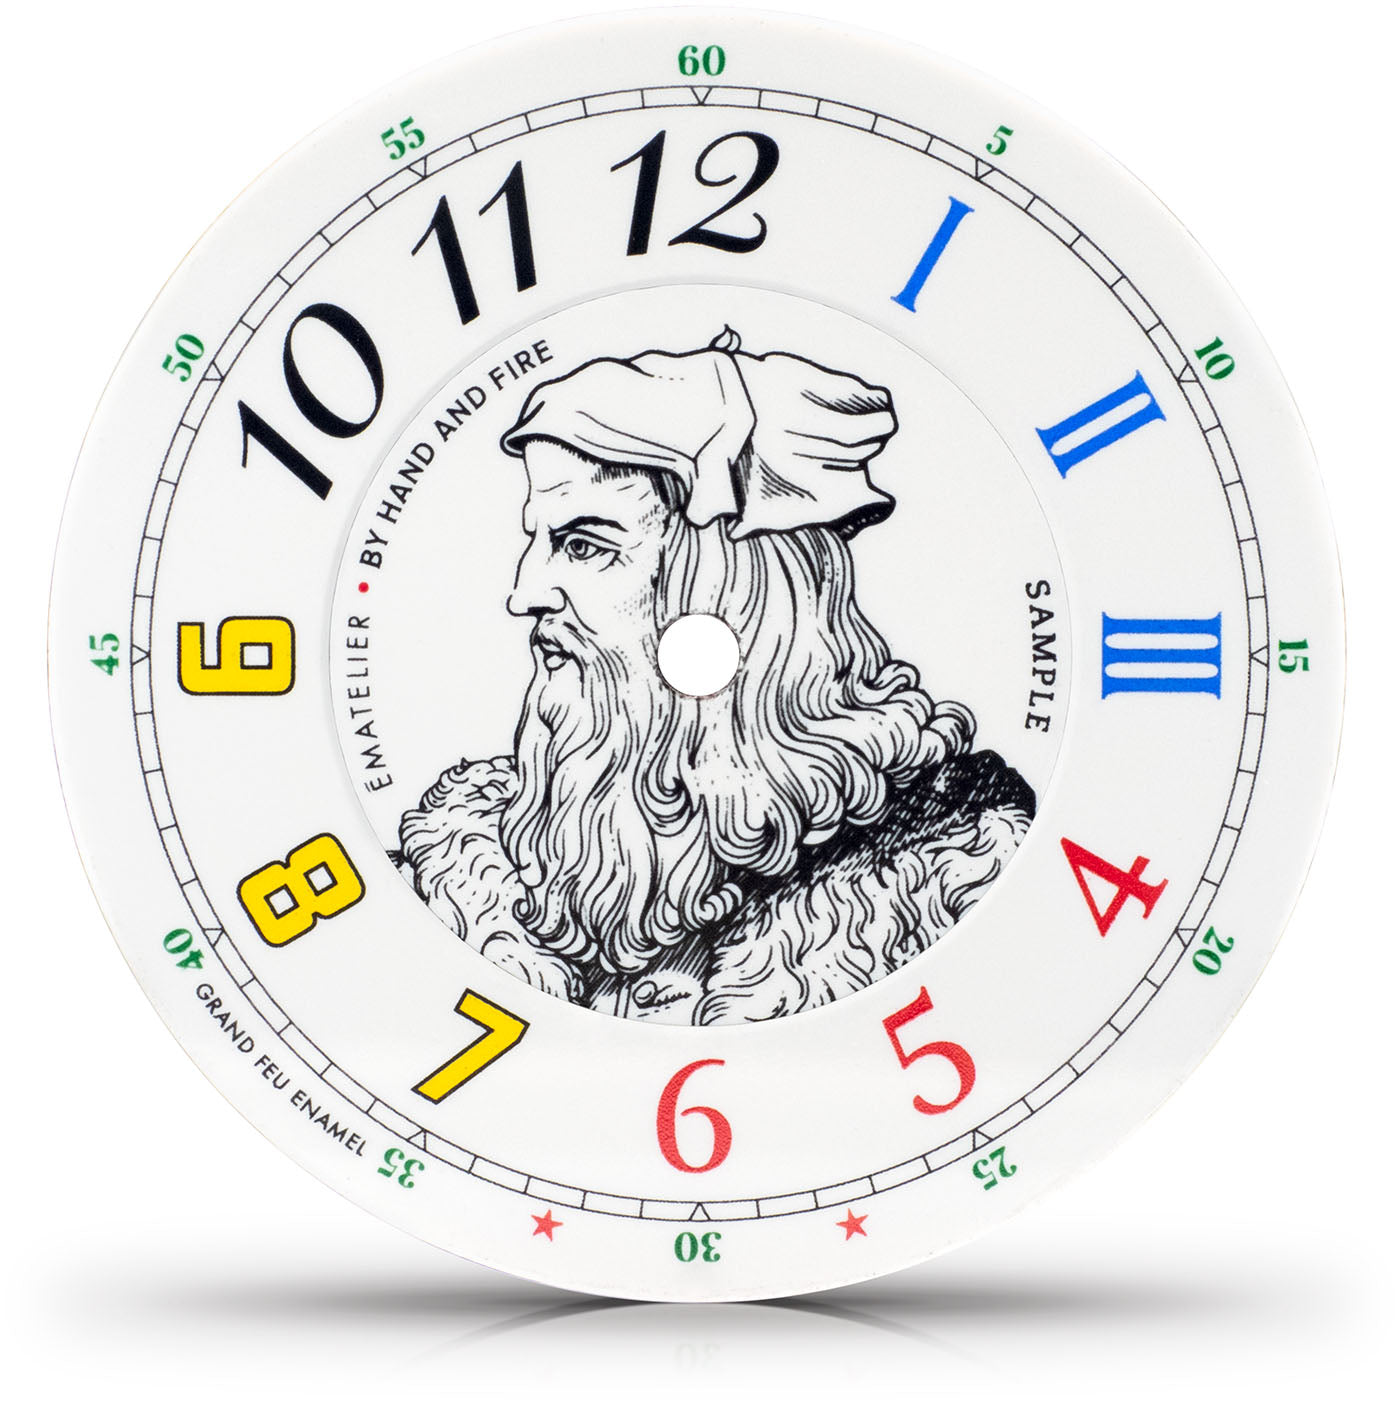 Sample enamelled watch dial with multiple features